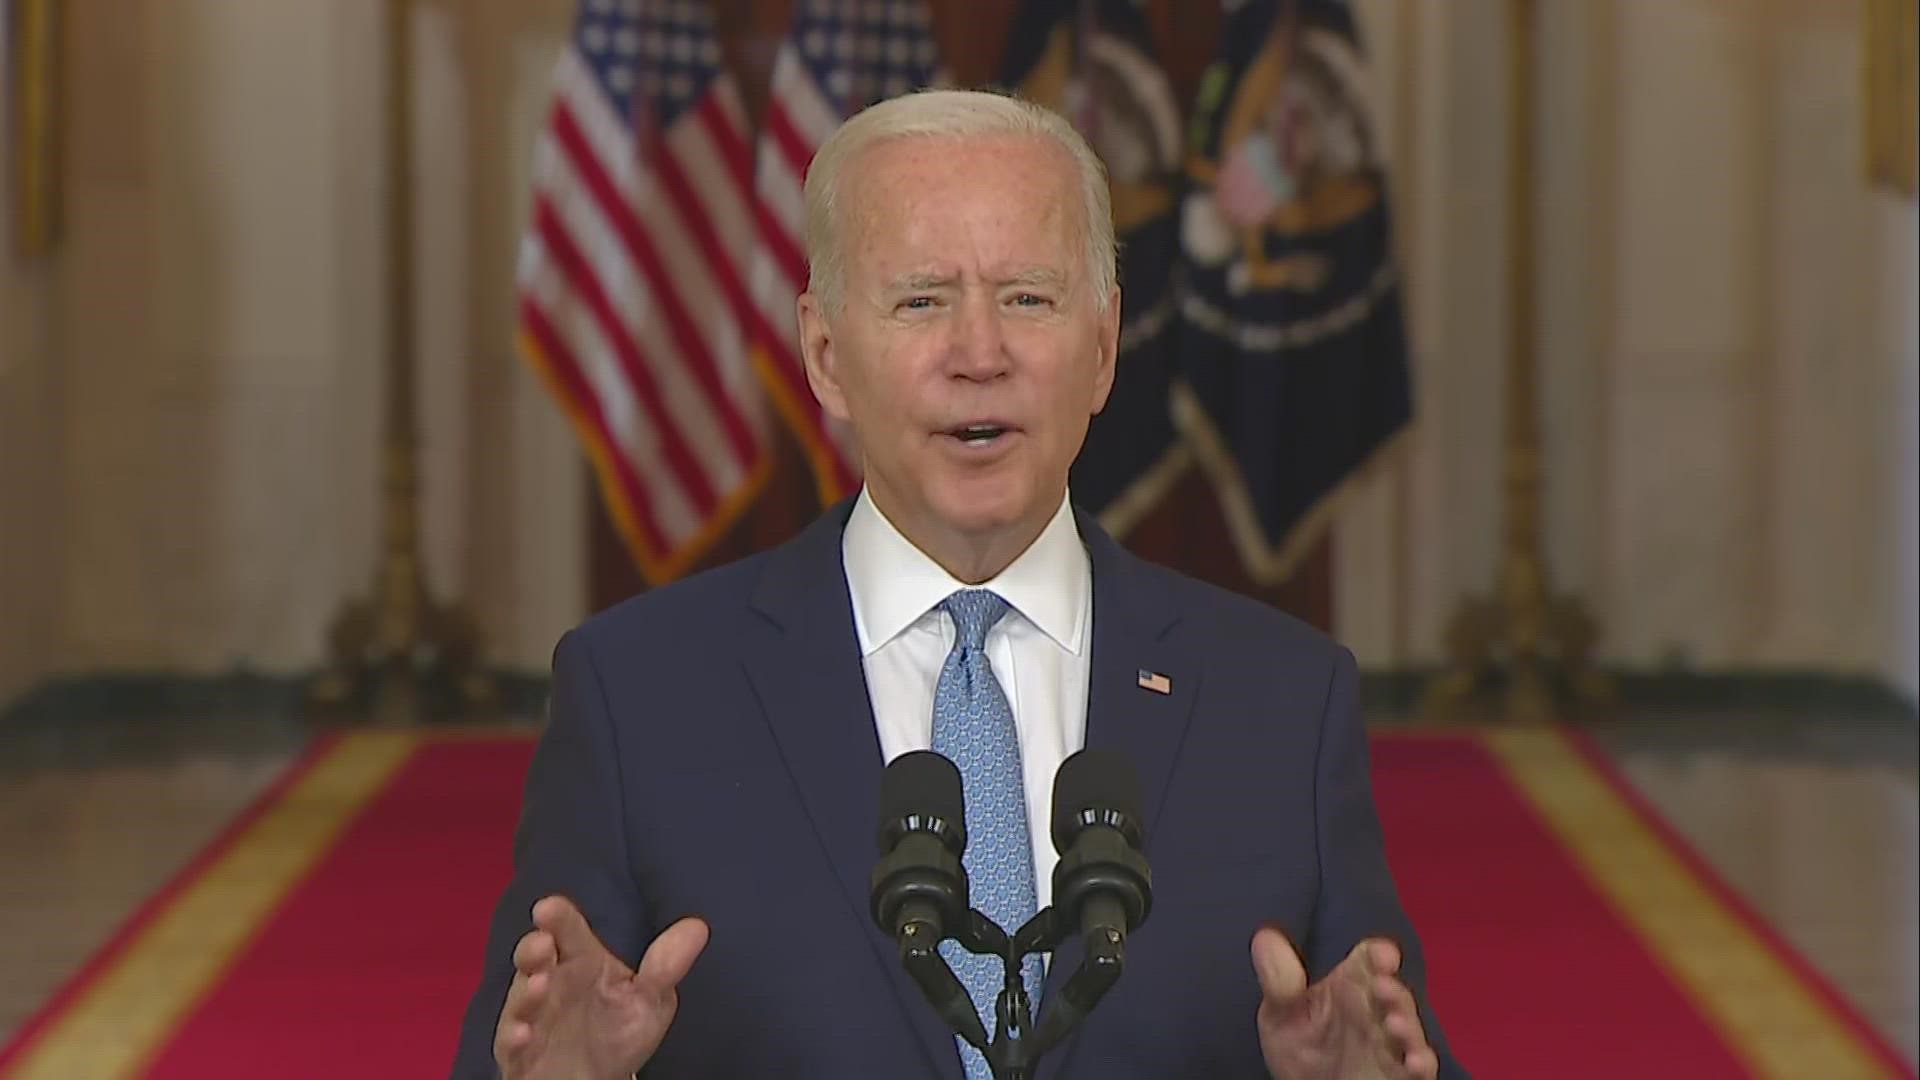 President Joe Biden committed Tuesday to getting all remaining Americans out of Afghanistan. All remaining U.S. military members have already left.